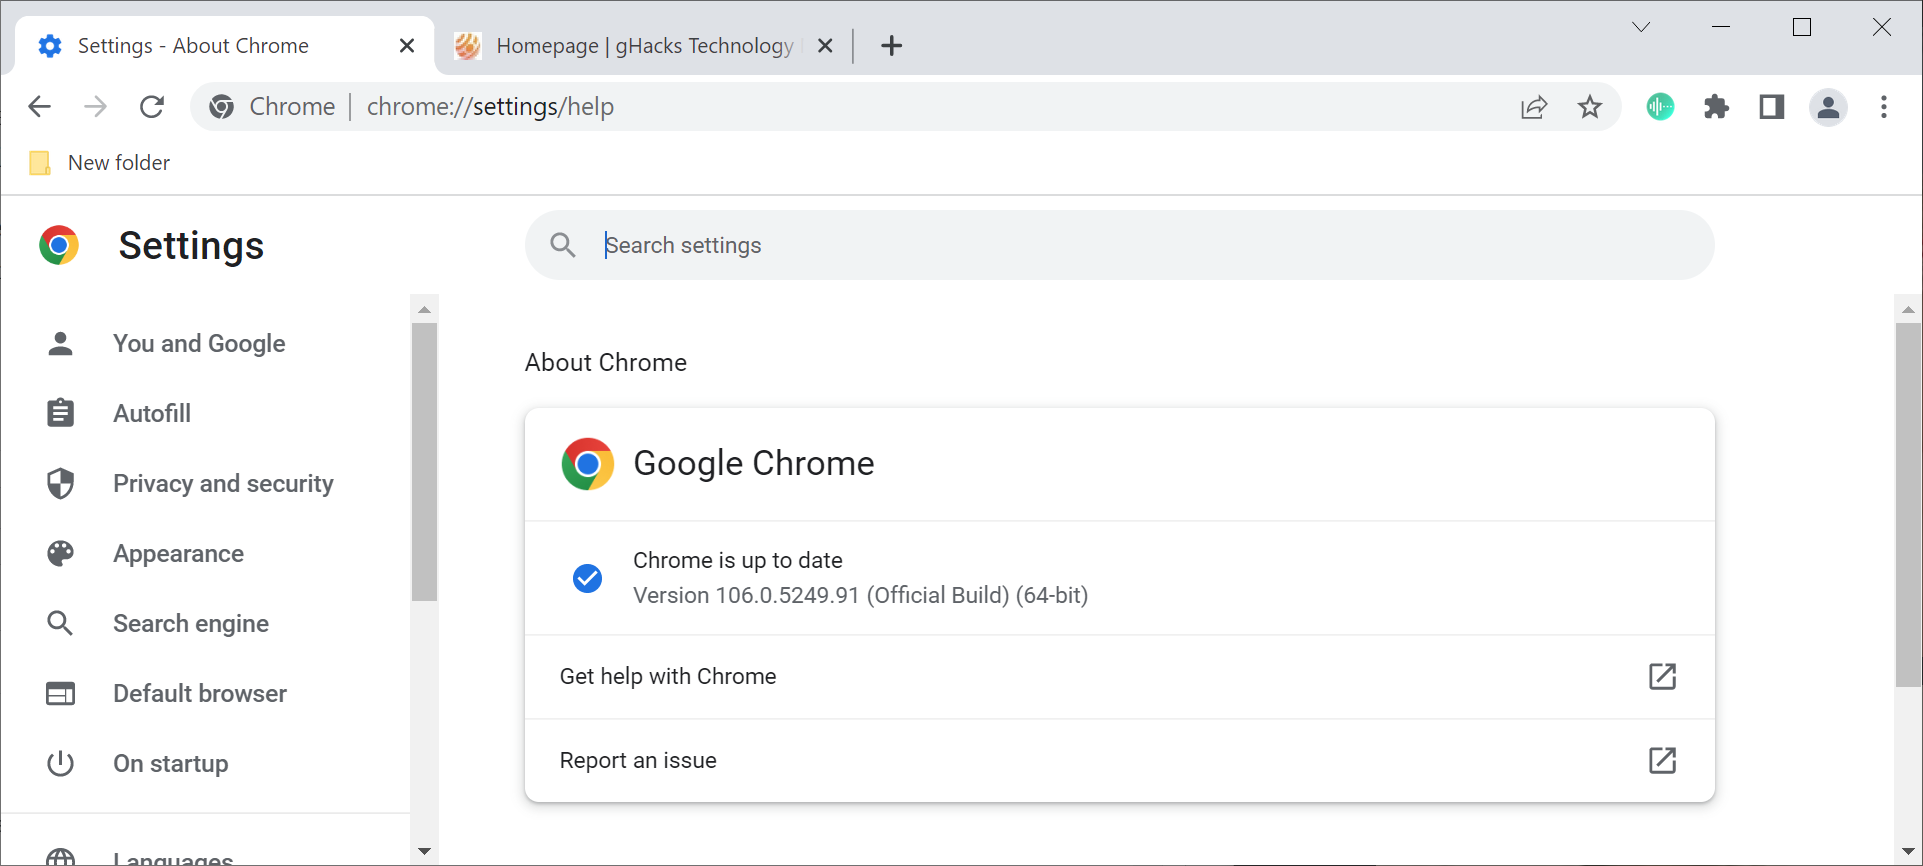 Google released a second Chrome security update this week